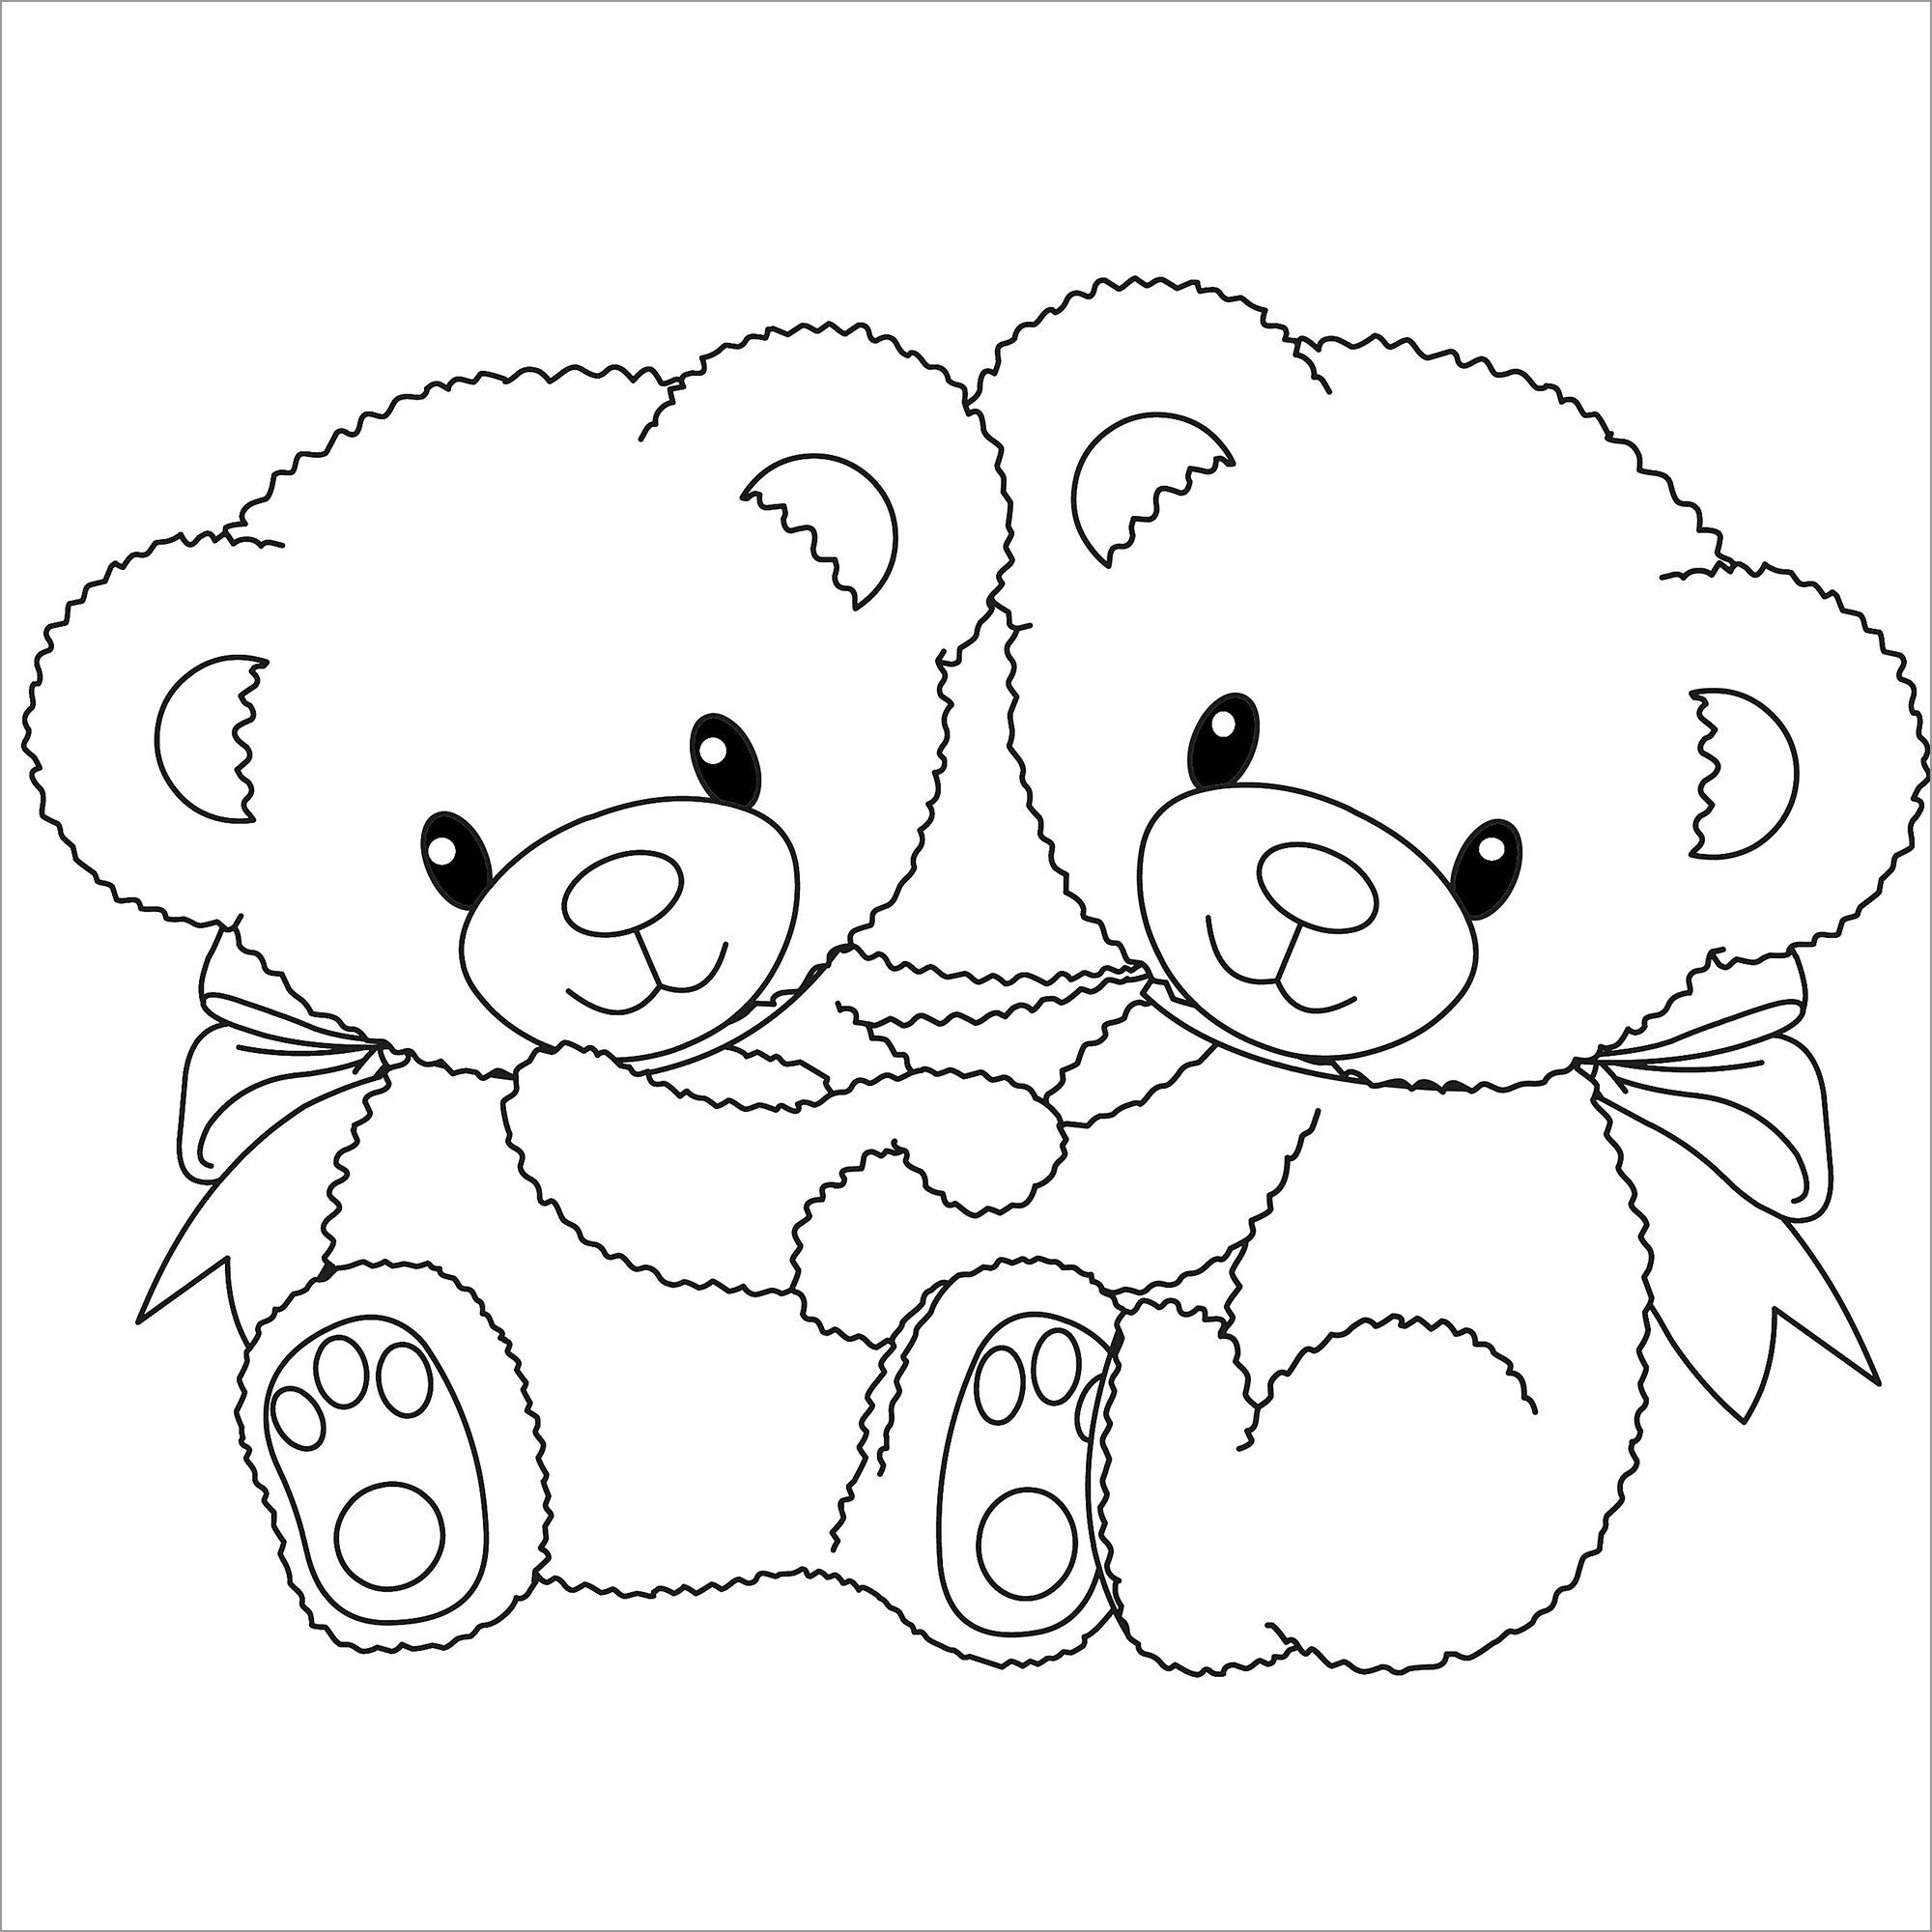 Cute Teddy Bear Coloring Page